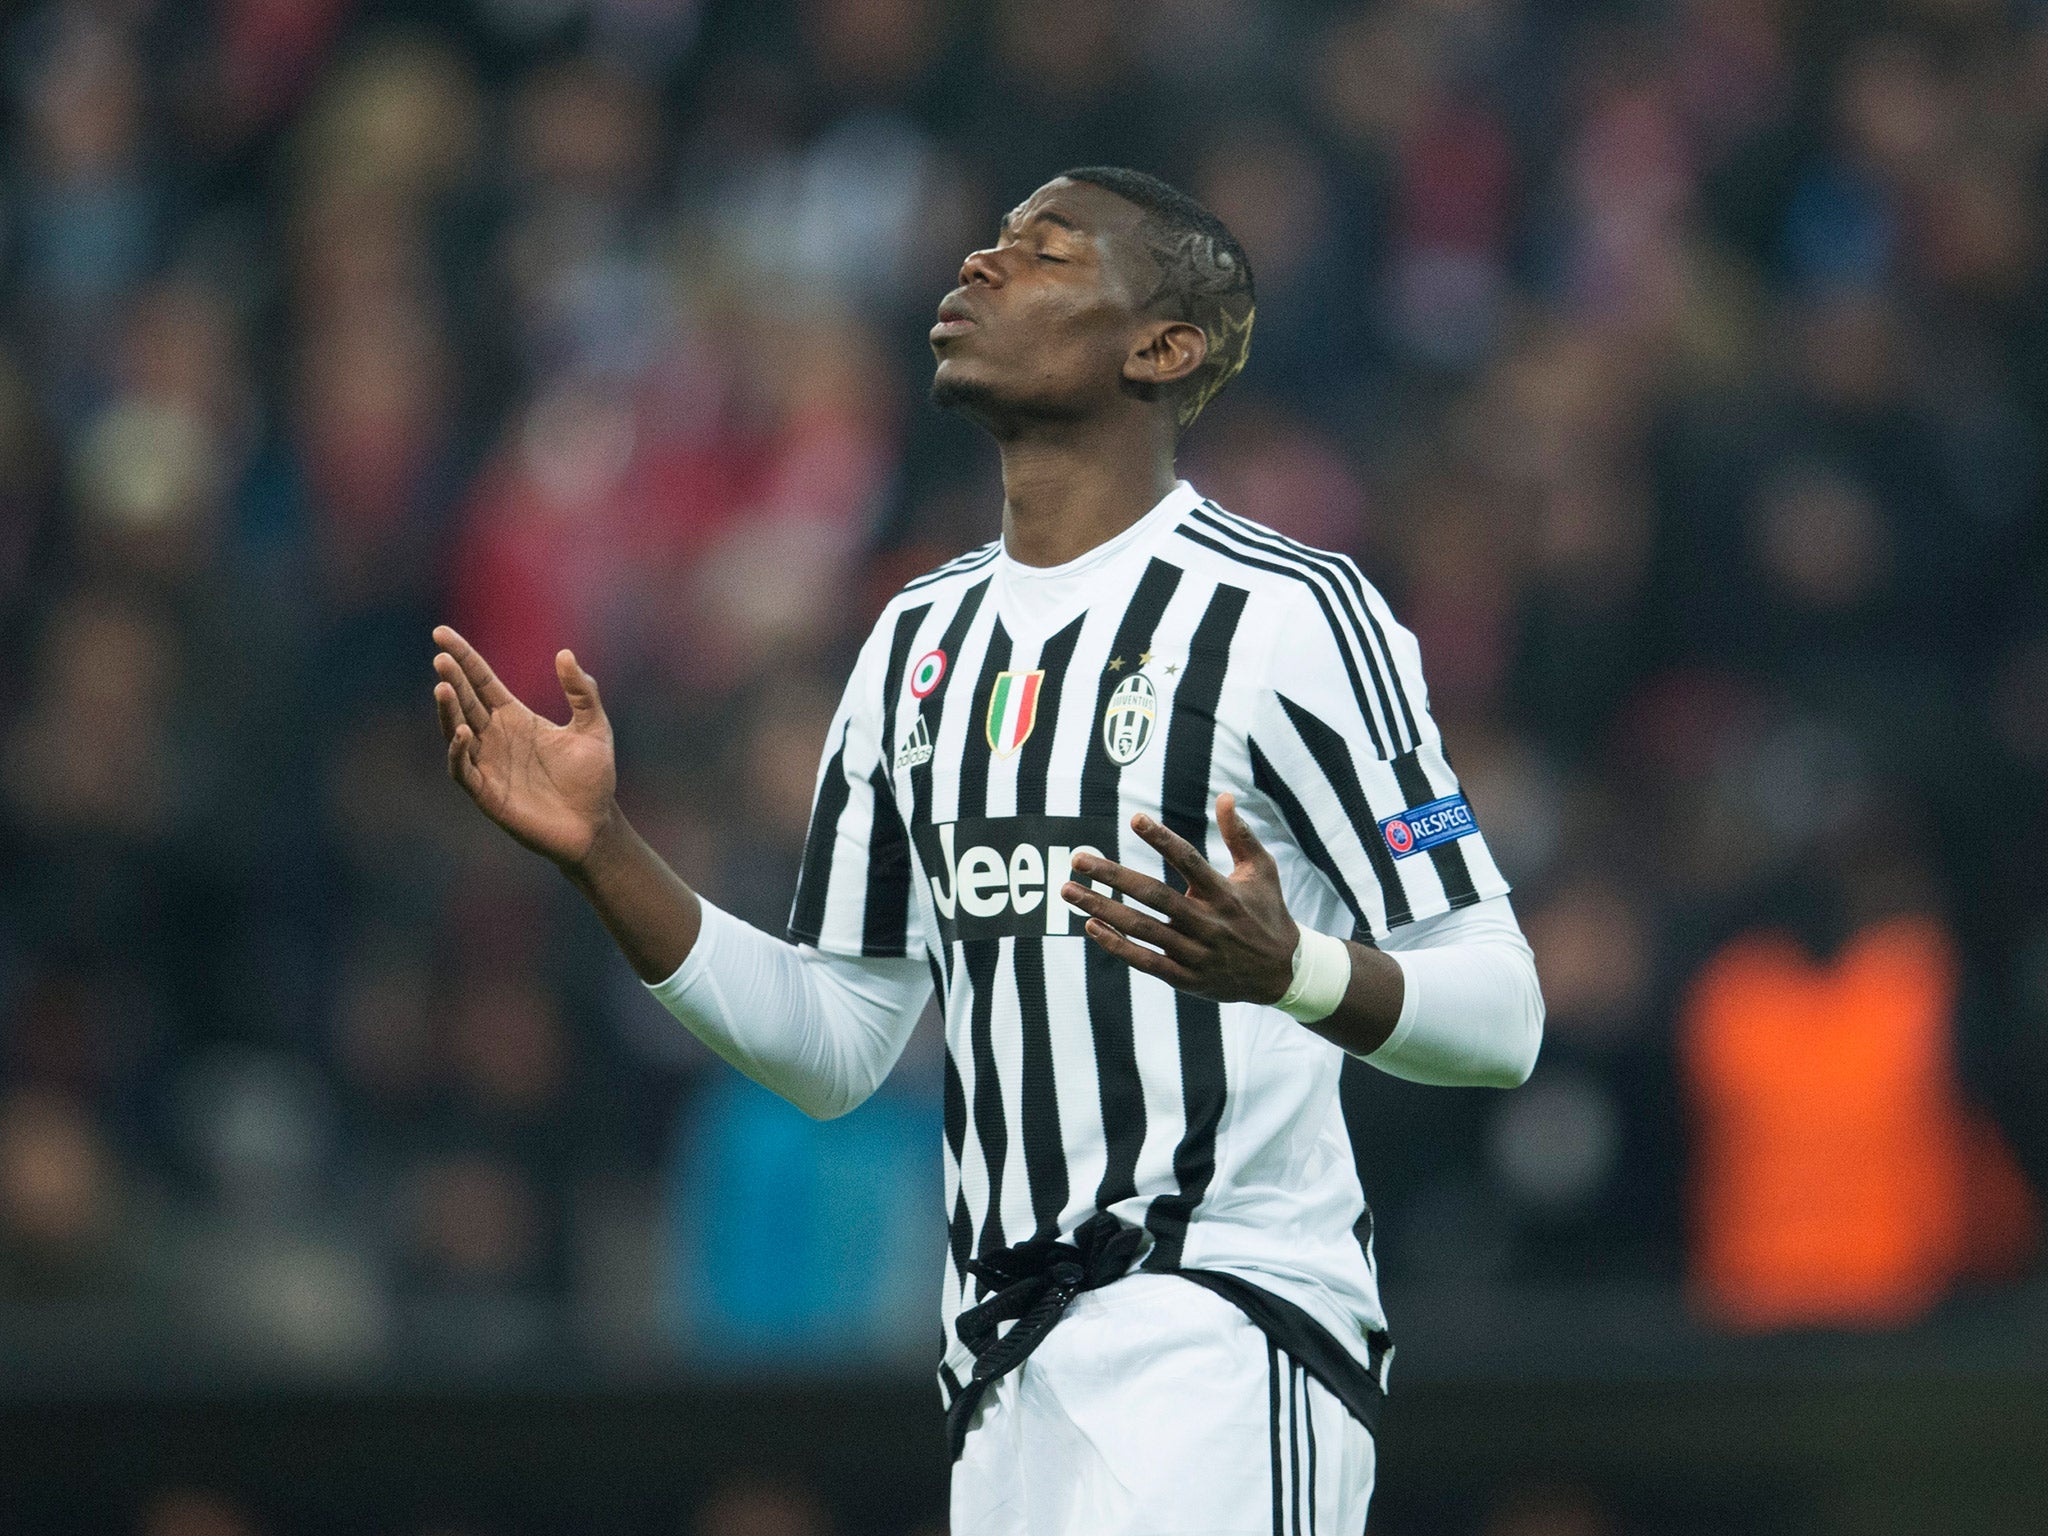 Paul Pogba is expected to join Manchester United in the coming days